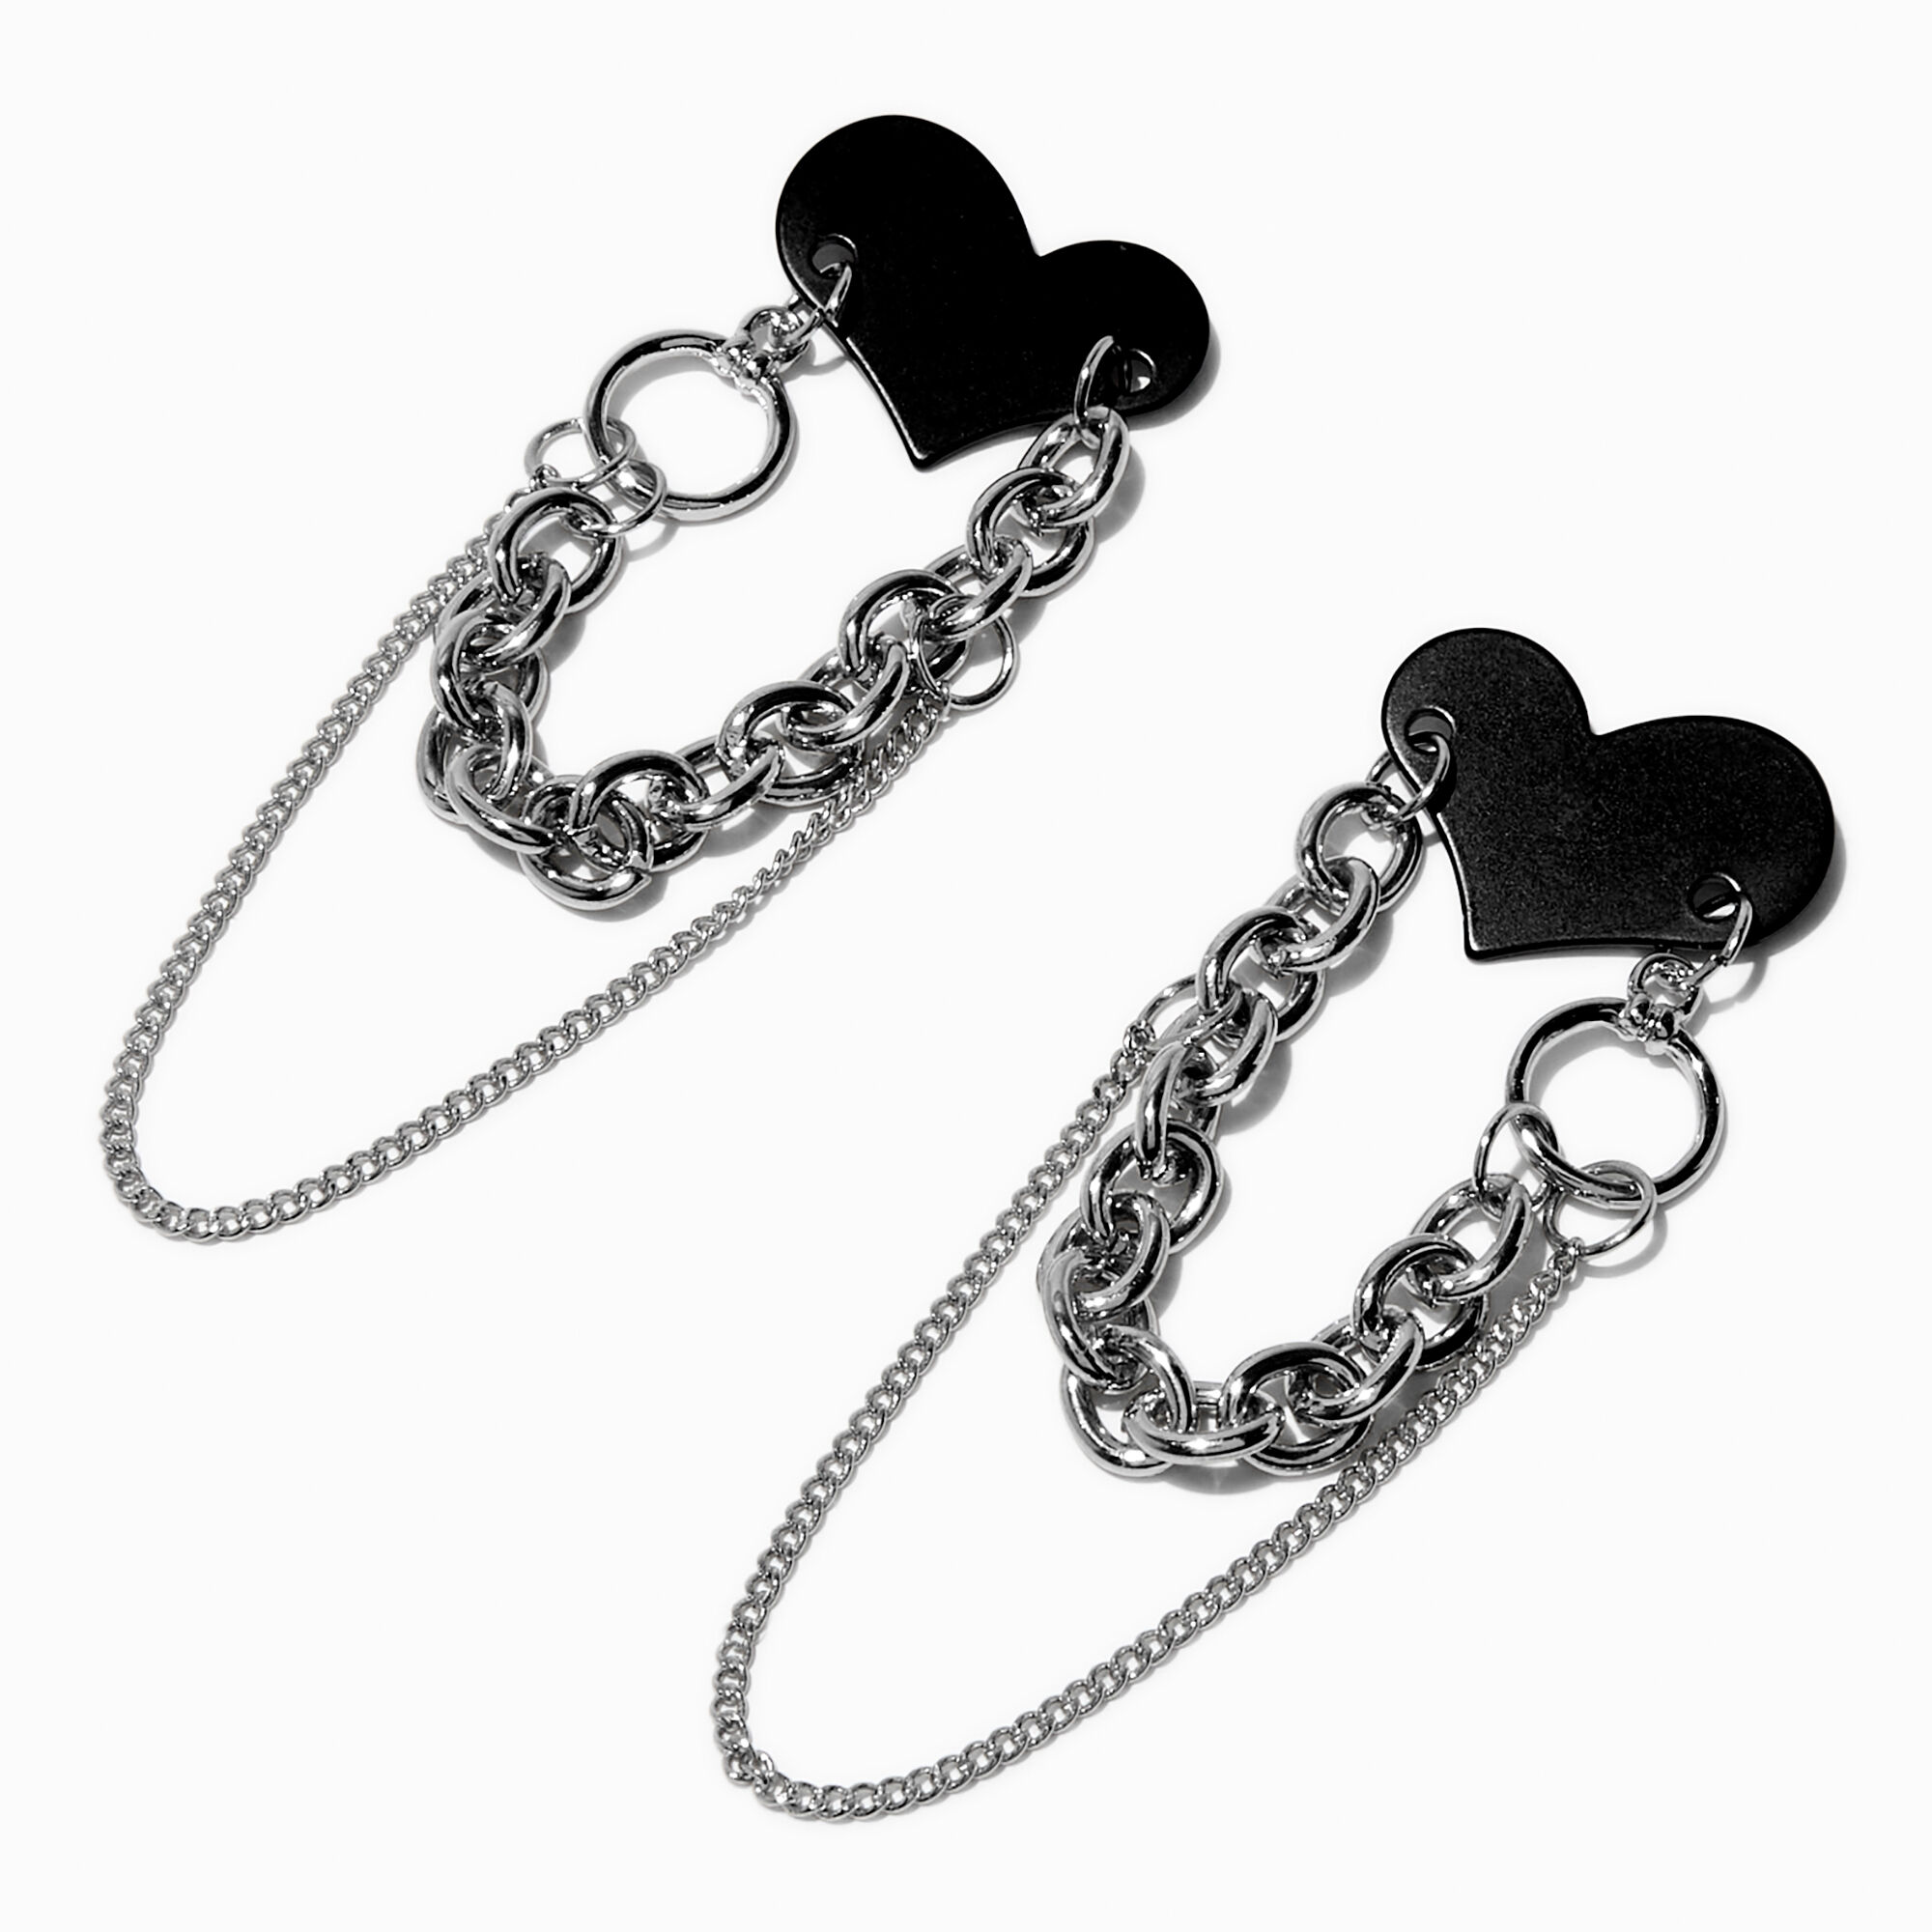 View Claires Heart Chain Link 3 Drop Earrings Black information